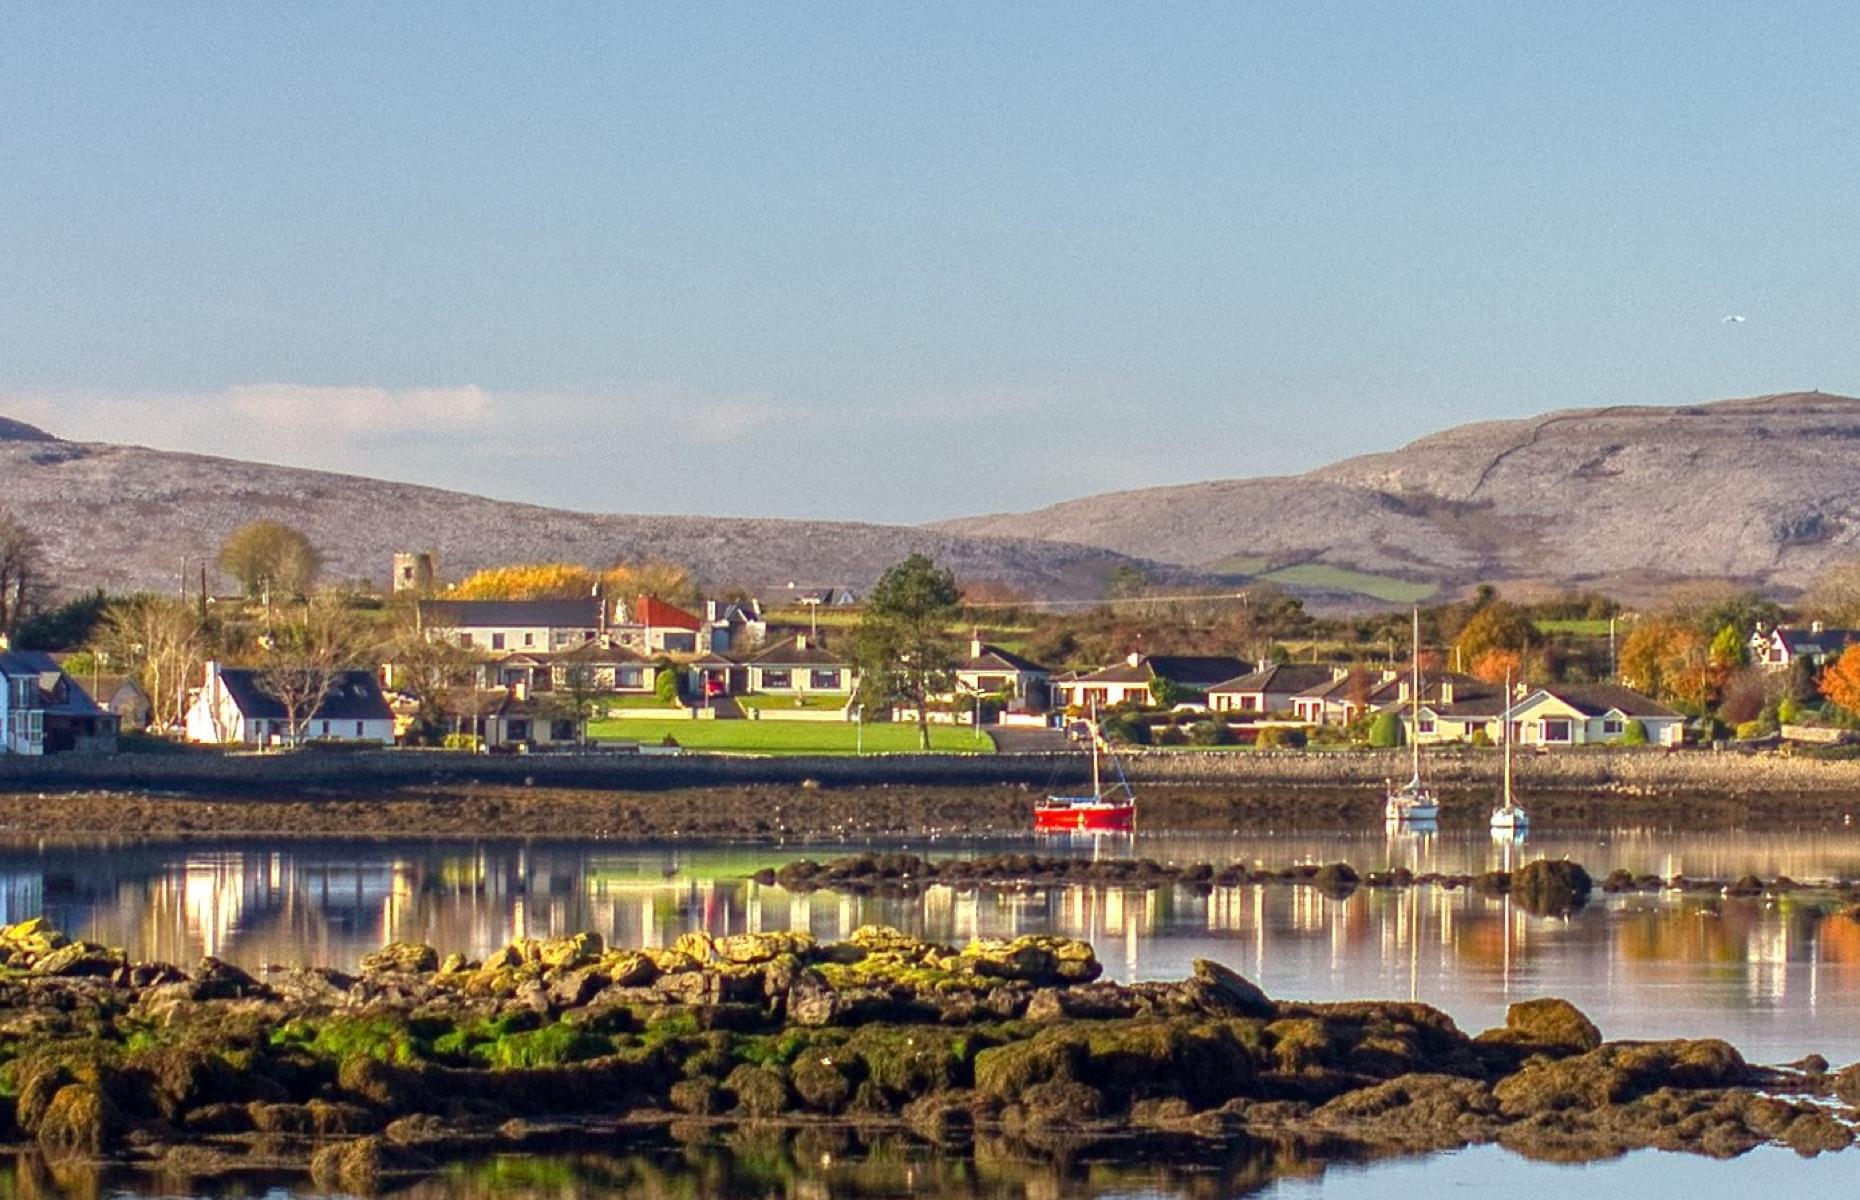 Ireland is a place of rich diversity, from rugged landscapes fringed by the windswept sea to heritage-led villages steeped in history, culture and rich greenery. With so many places to choose from, we’ve rounded up a selection of the most beautiful small towns and villages to visit on the Emerald Isle.